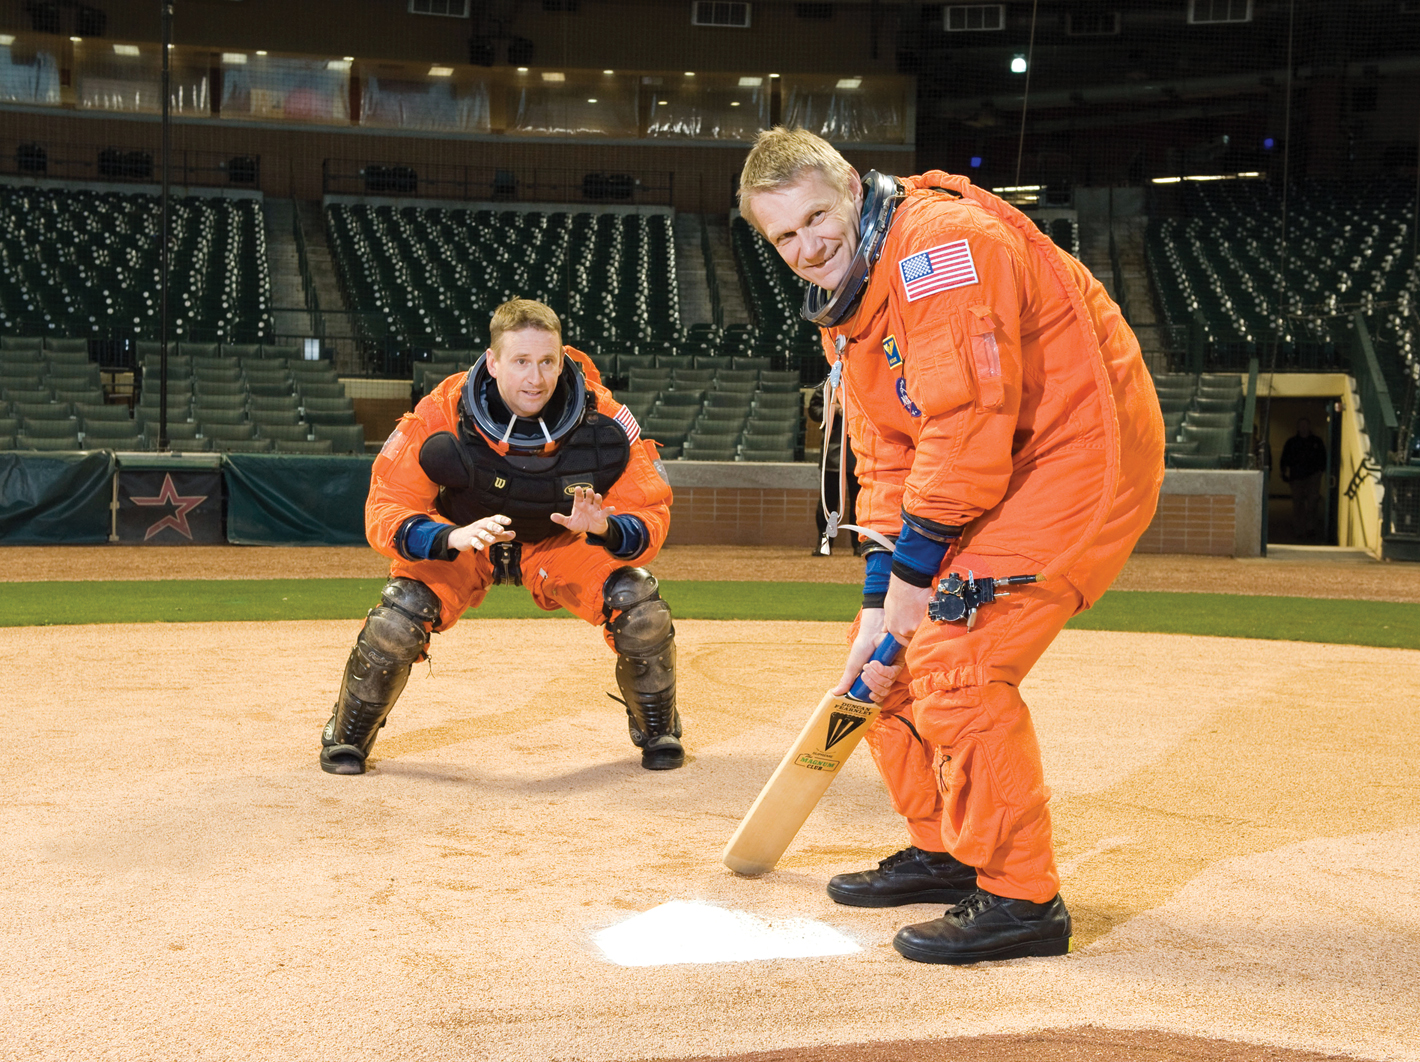 These space shuttle astronauts, taking part in a space flight awareness photo shoot playing baseball.